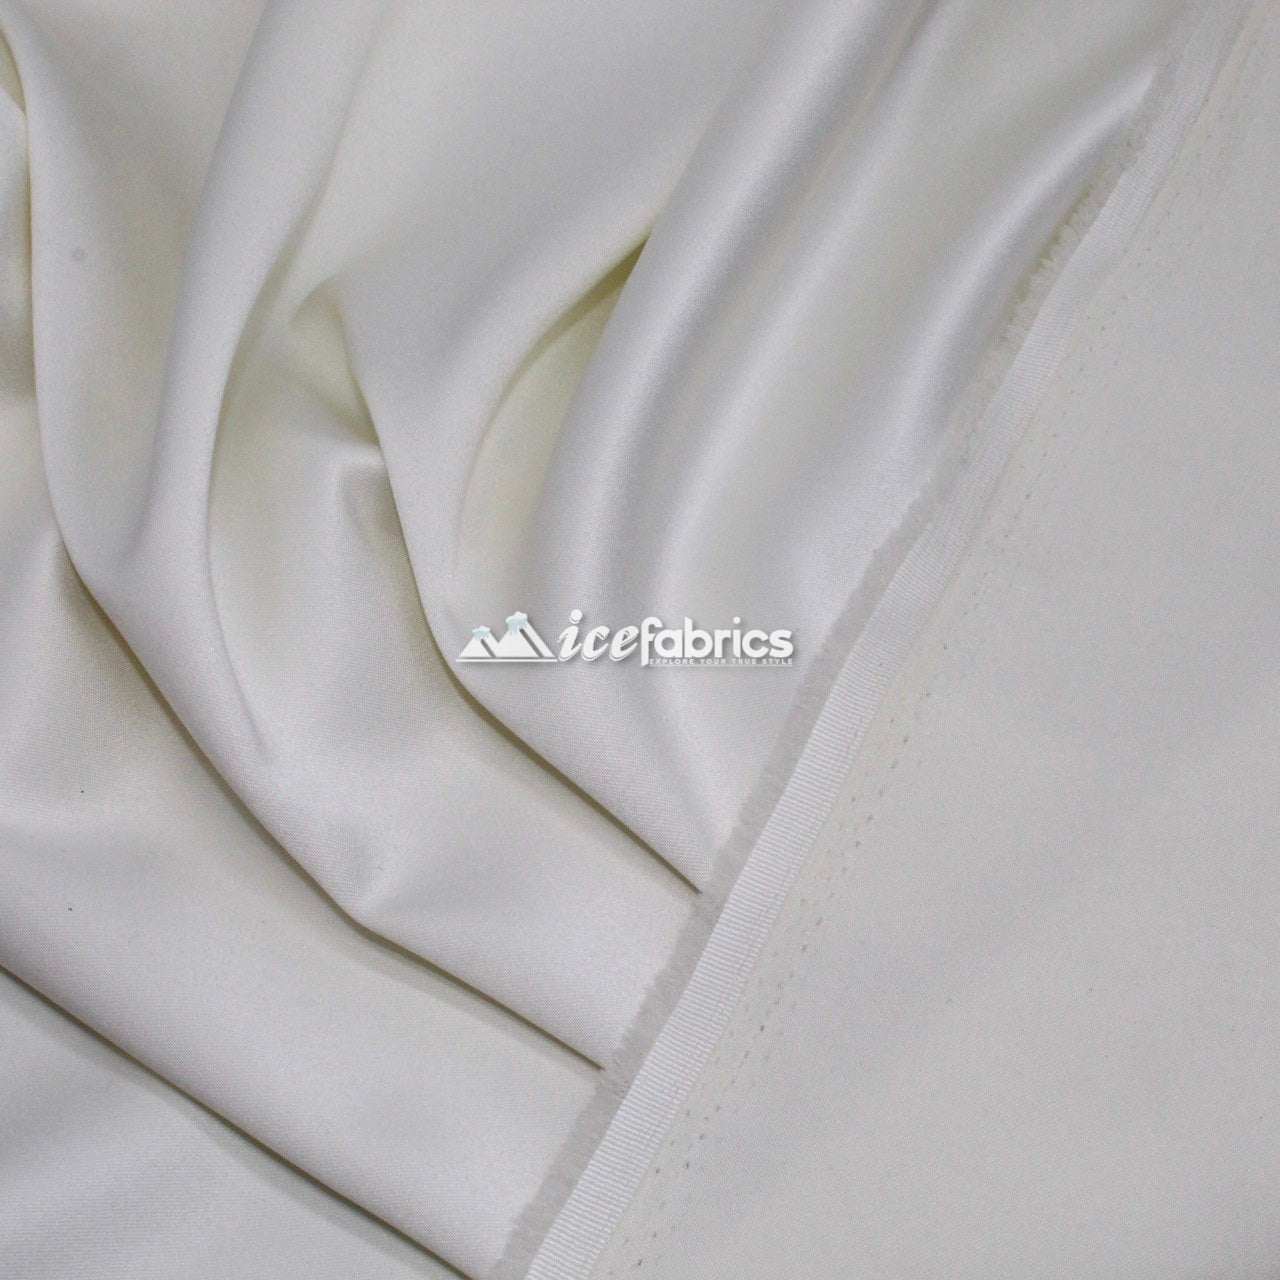 Armani Thick Solid Color Silky Stretch Satin Fabric Sold By The YardSatin FabricICE FABRICSICE FABRICSOff WhiteArmani Thick Solid Color Silky Stretch Satin Fabric Sold By The Yard ICE FABRICS White